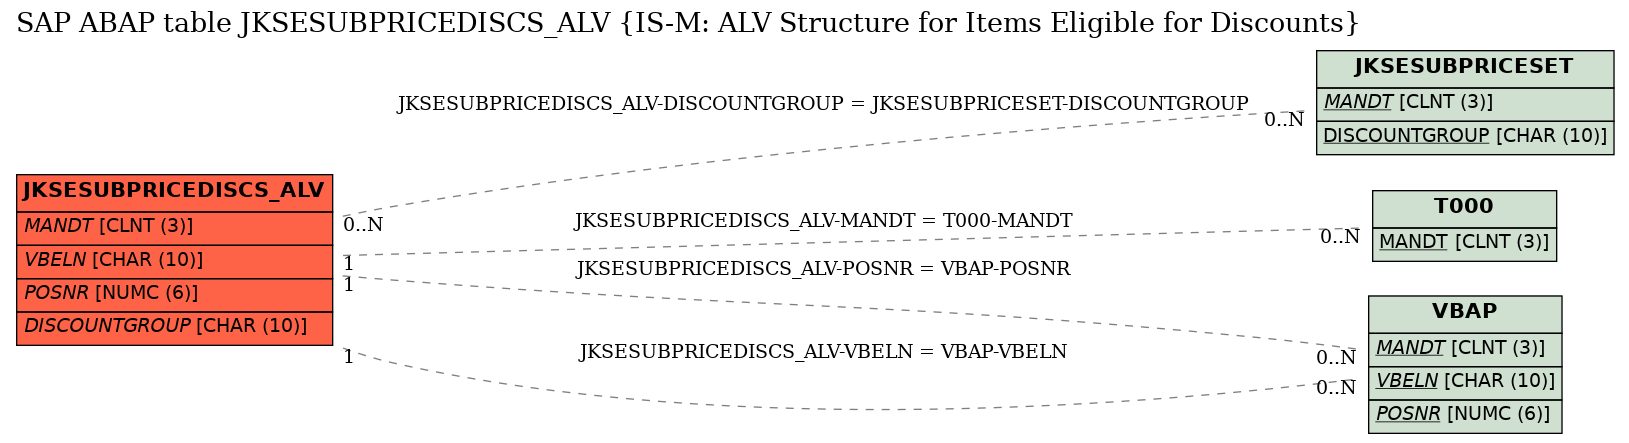 E-R Diagram for table JKSESUBPRICEDISCS_ALV (IS-M: ALV Structure for Items Eligible for Discounts)